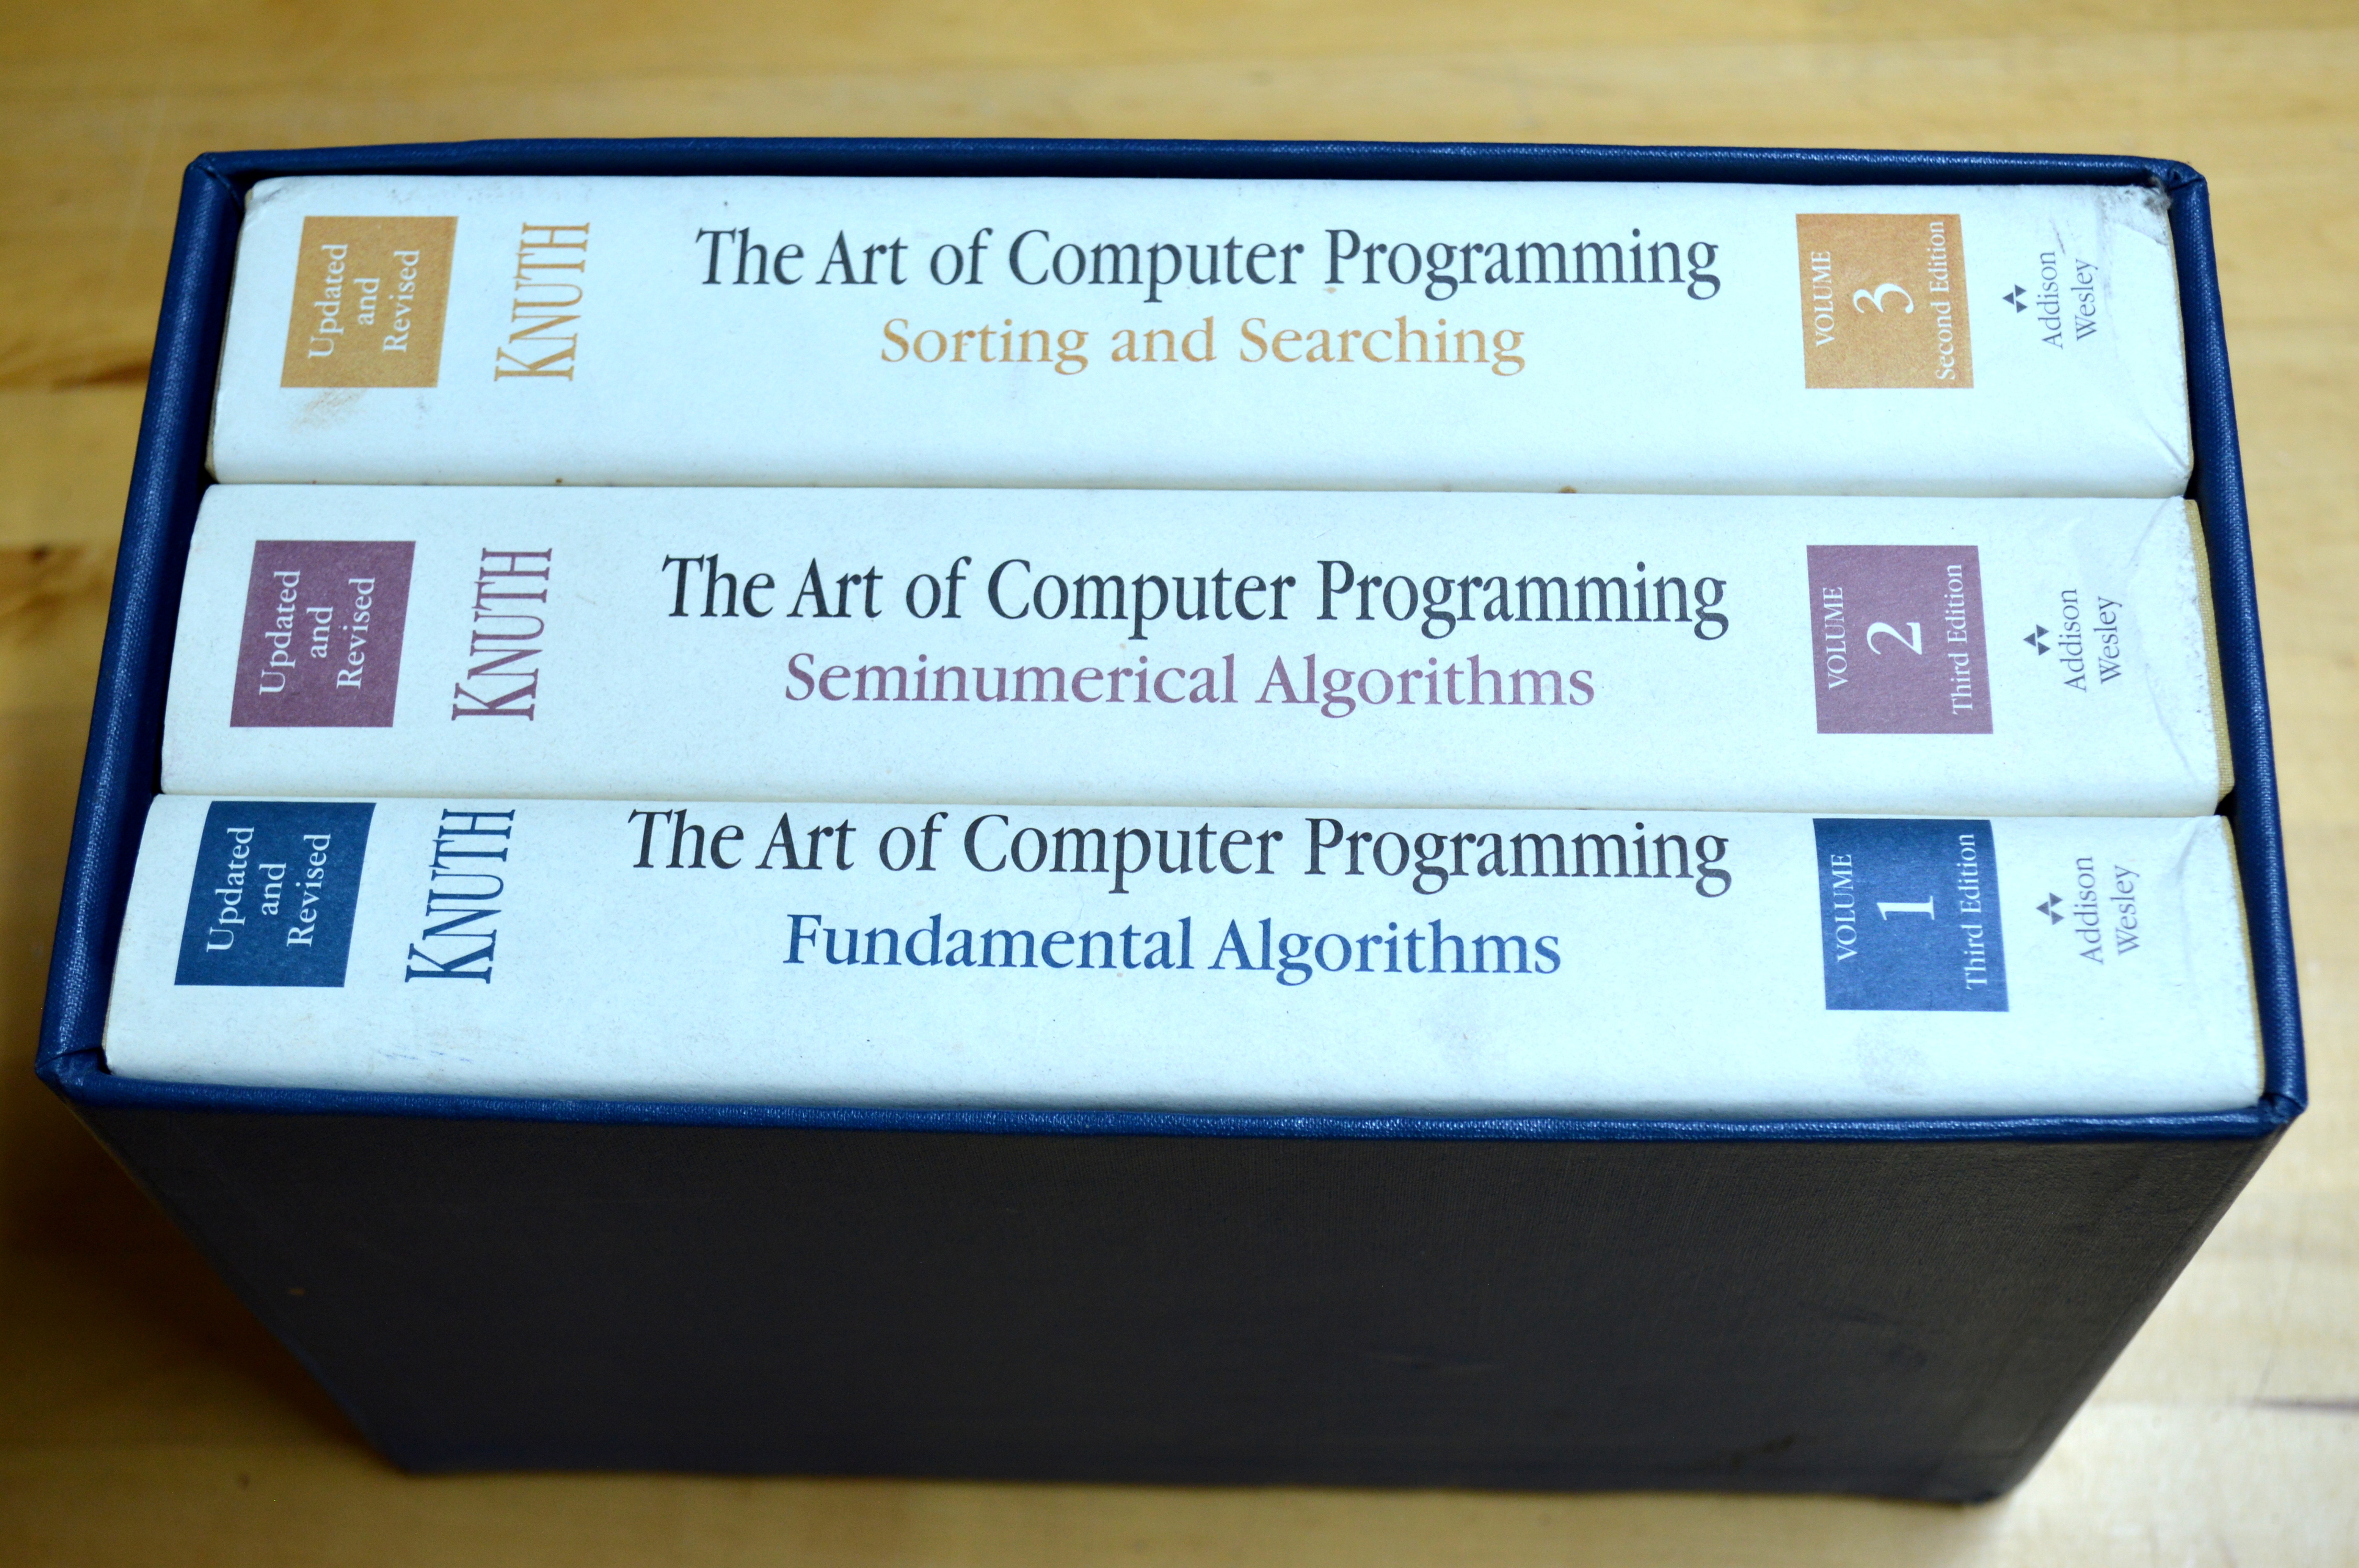 The Art of Computer Programming, 3 Volumes: 1. Fundamental Algorithms (3rd edition); 2. Seminumerical Algorithms (3rd edition); 3. Sorting and Searching (2nd edition) - Donald E Knuth